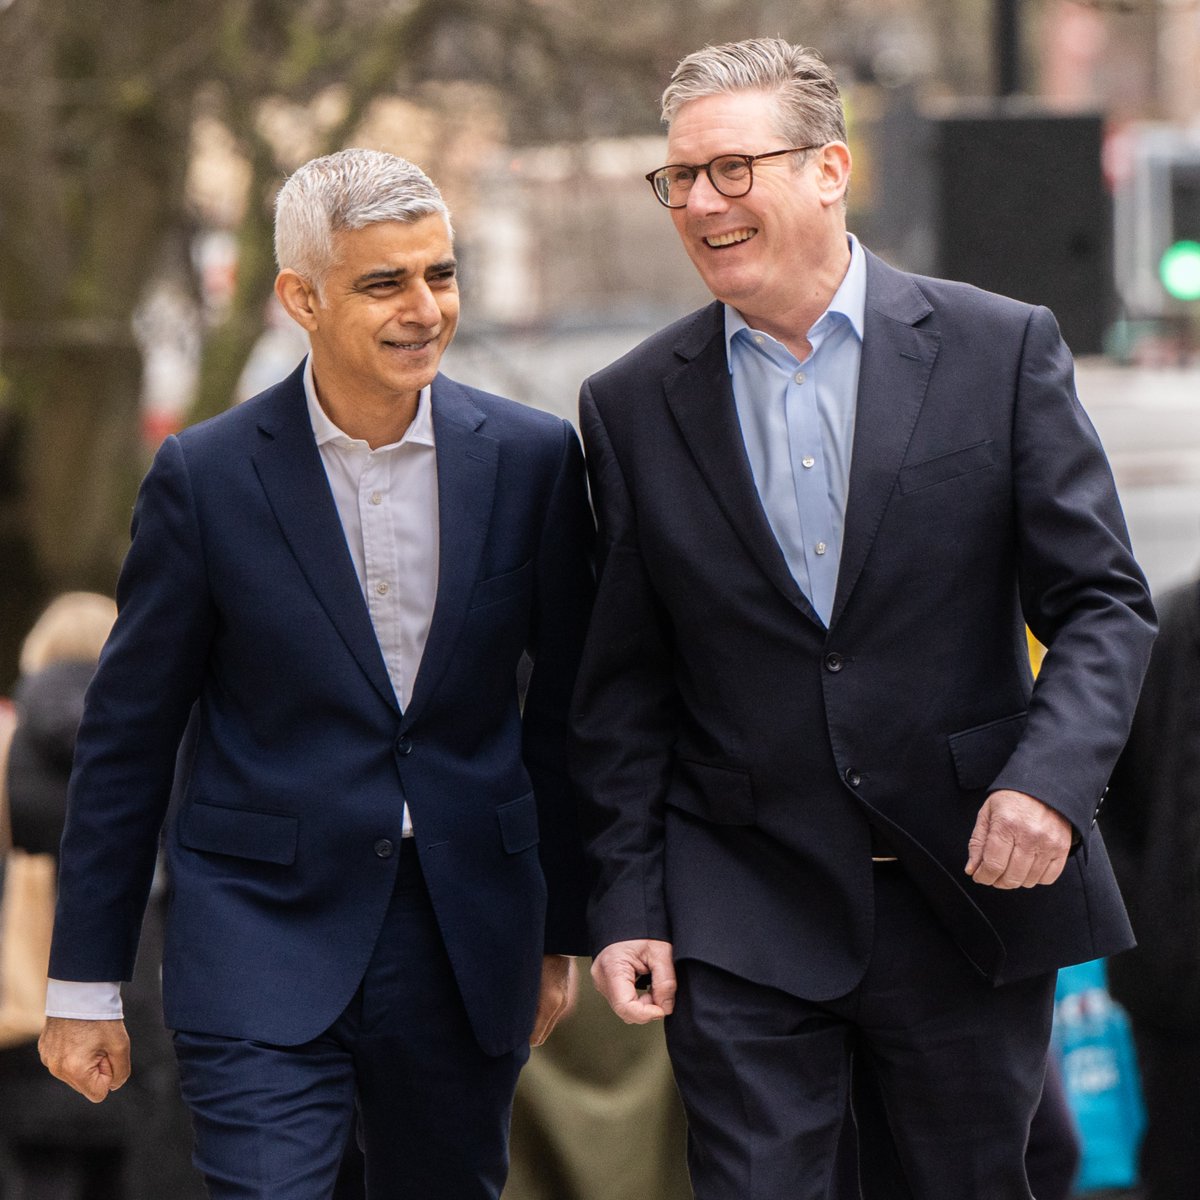 Labour in power delivers. @SadiqKhan has shown that as Mayor of London. Great to be with him today as he launches his re-election campaign, pledging 40,000 council homes by 2030. London, vote Labour on Thursday 2 May.